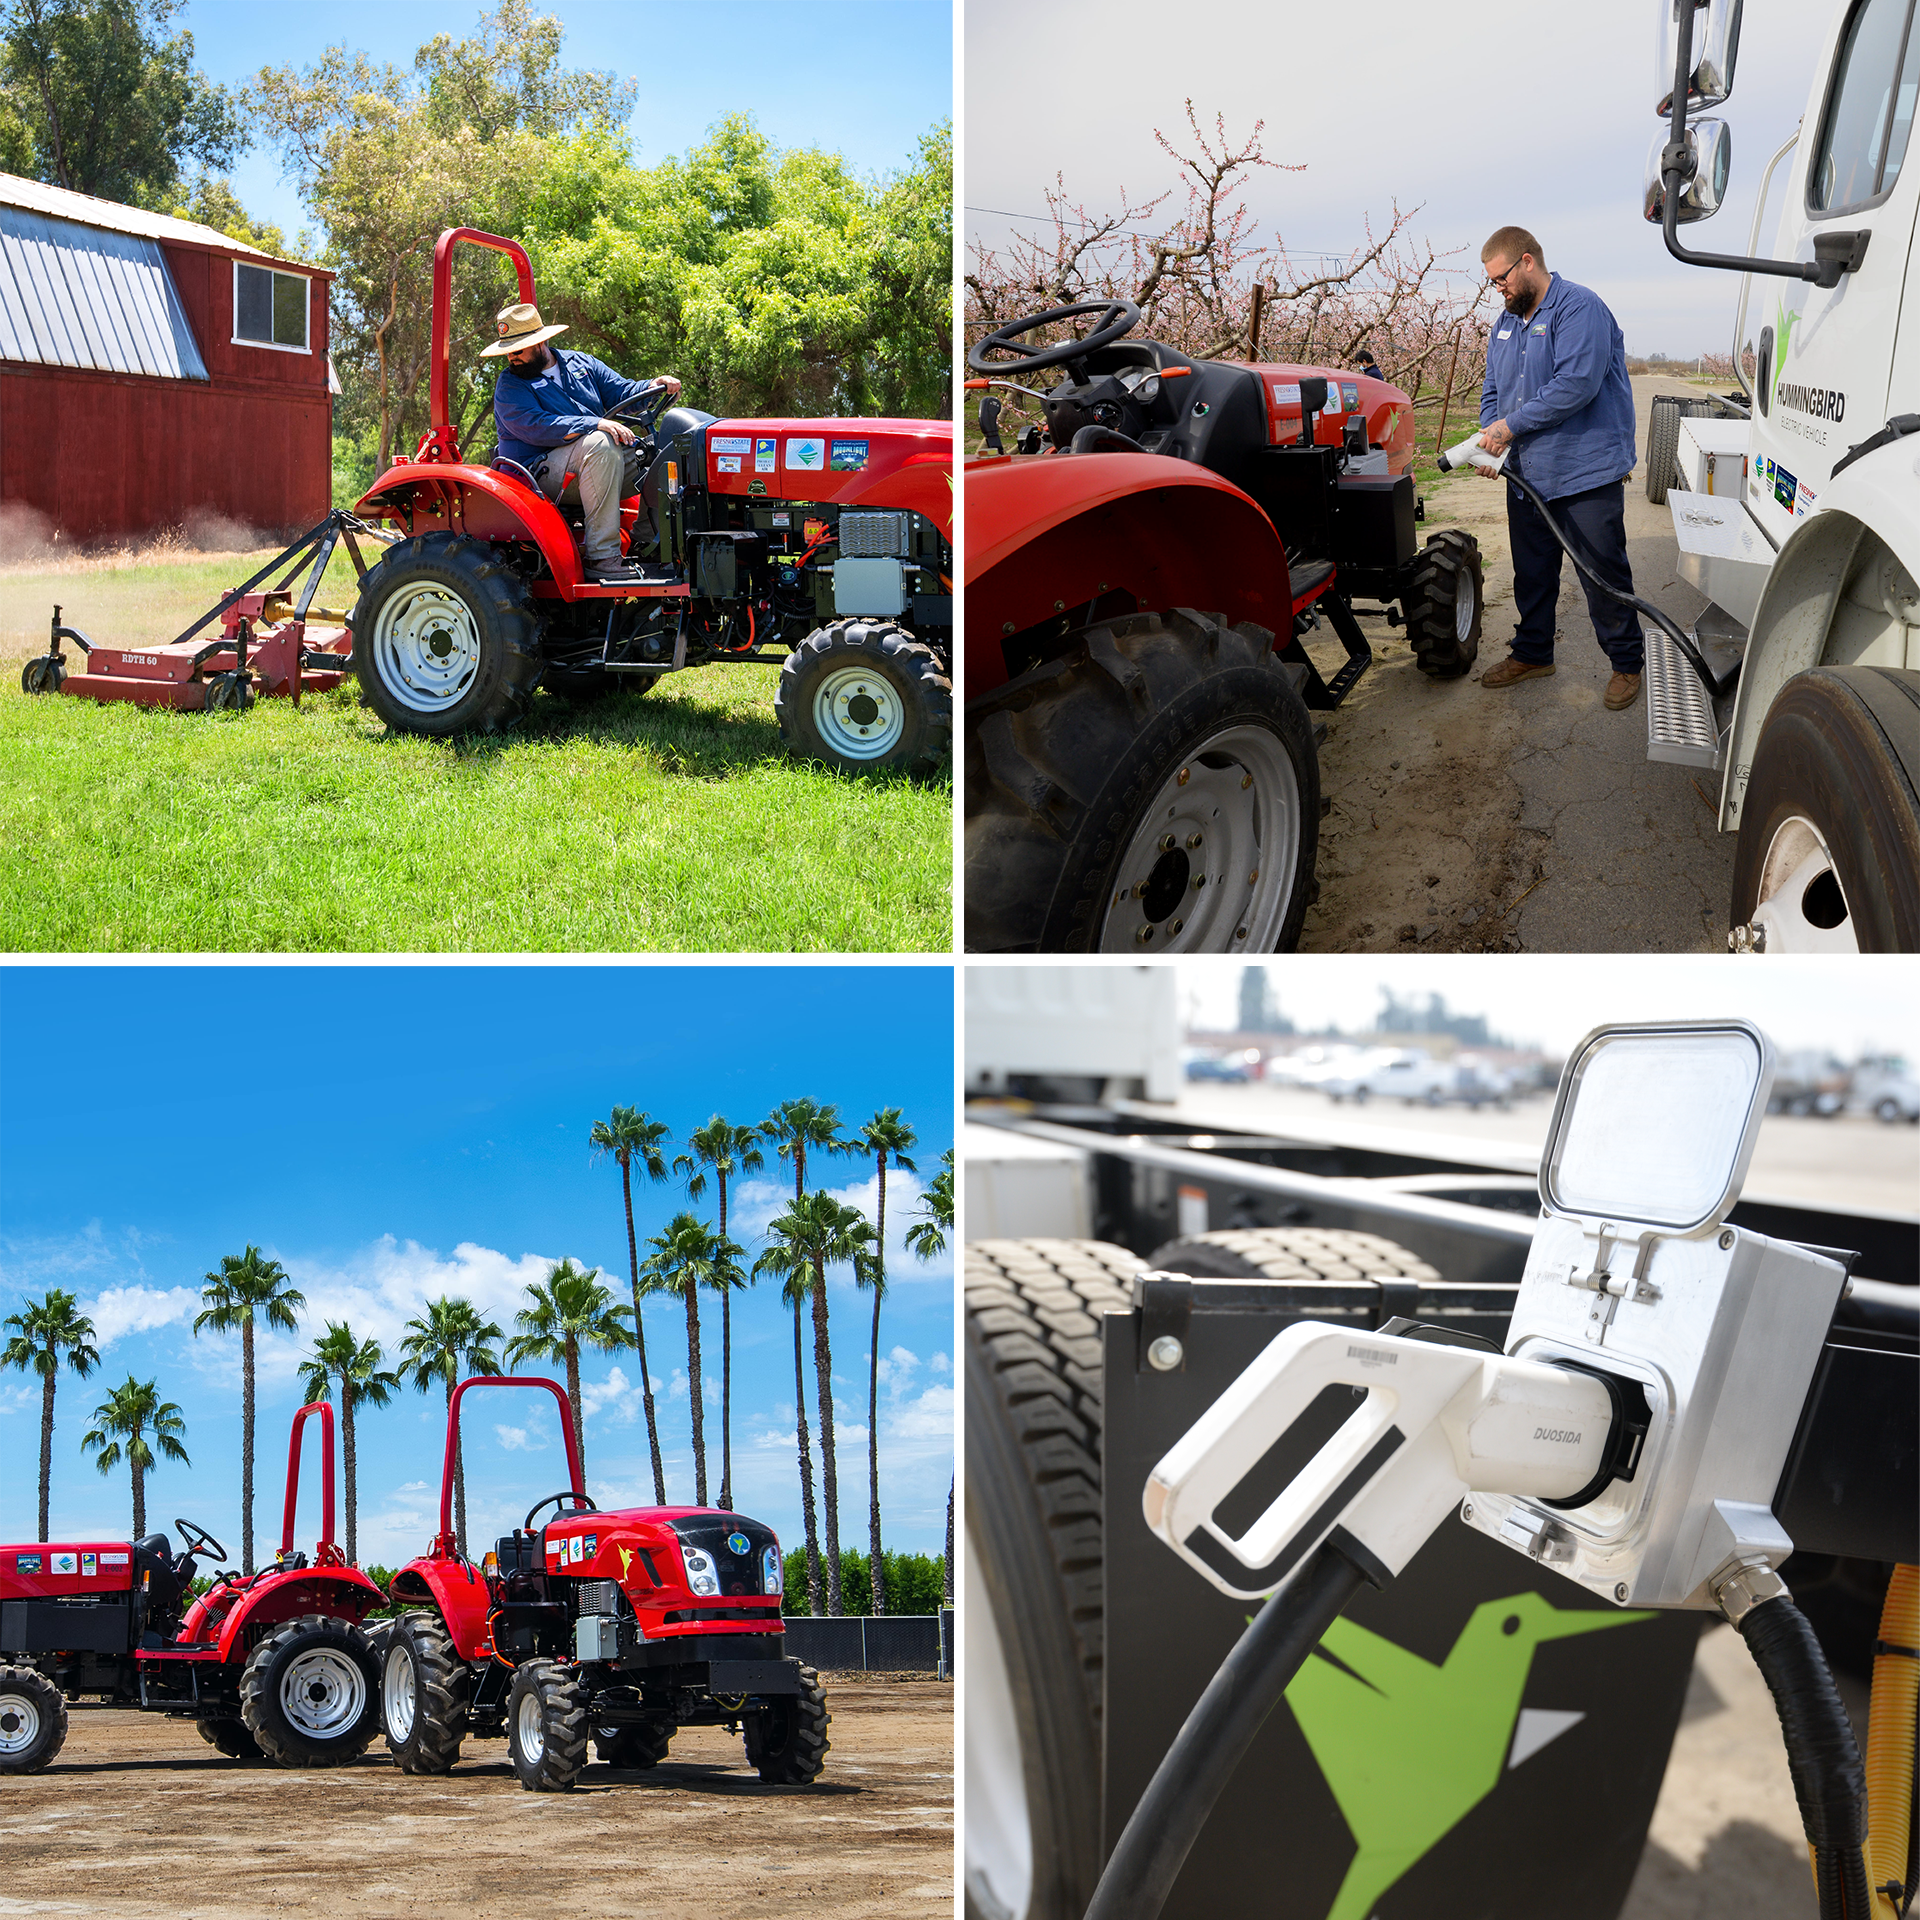 HummingbirdEV’s all-electric V2V truck and all-electric tractors working in farms in Central Valley, California.